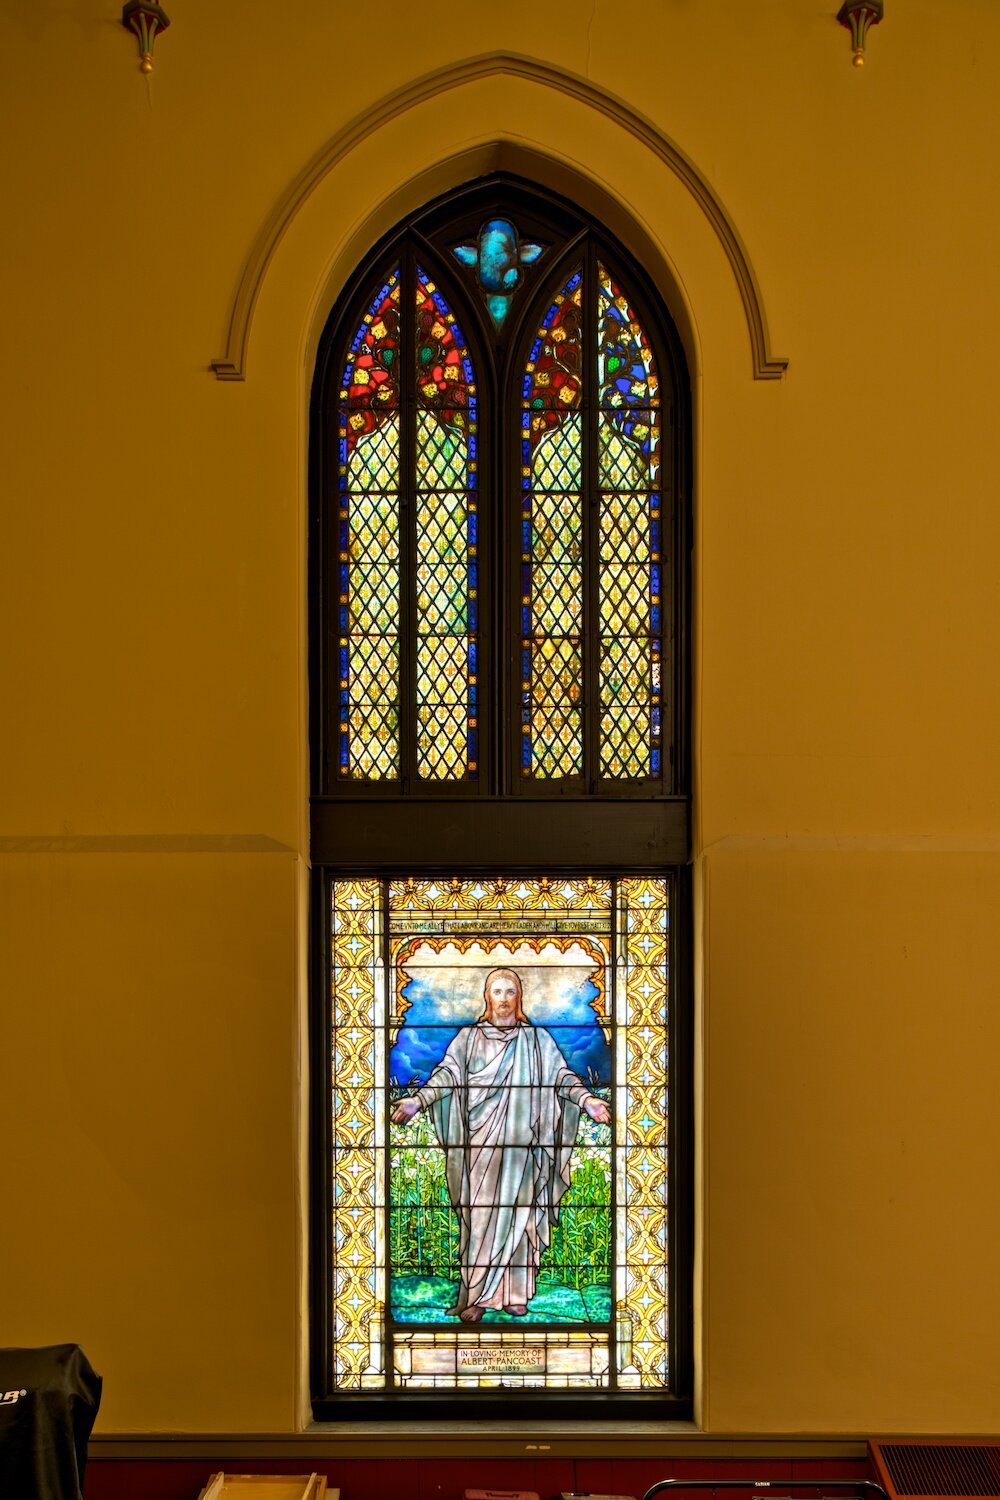 Tiffany Studios, "Welcoming Christ" and ornamental window from 1820s or later